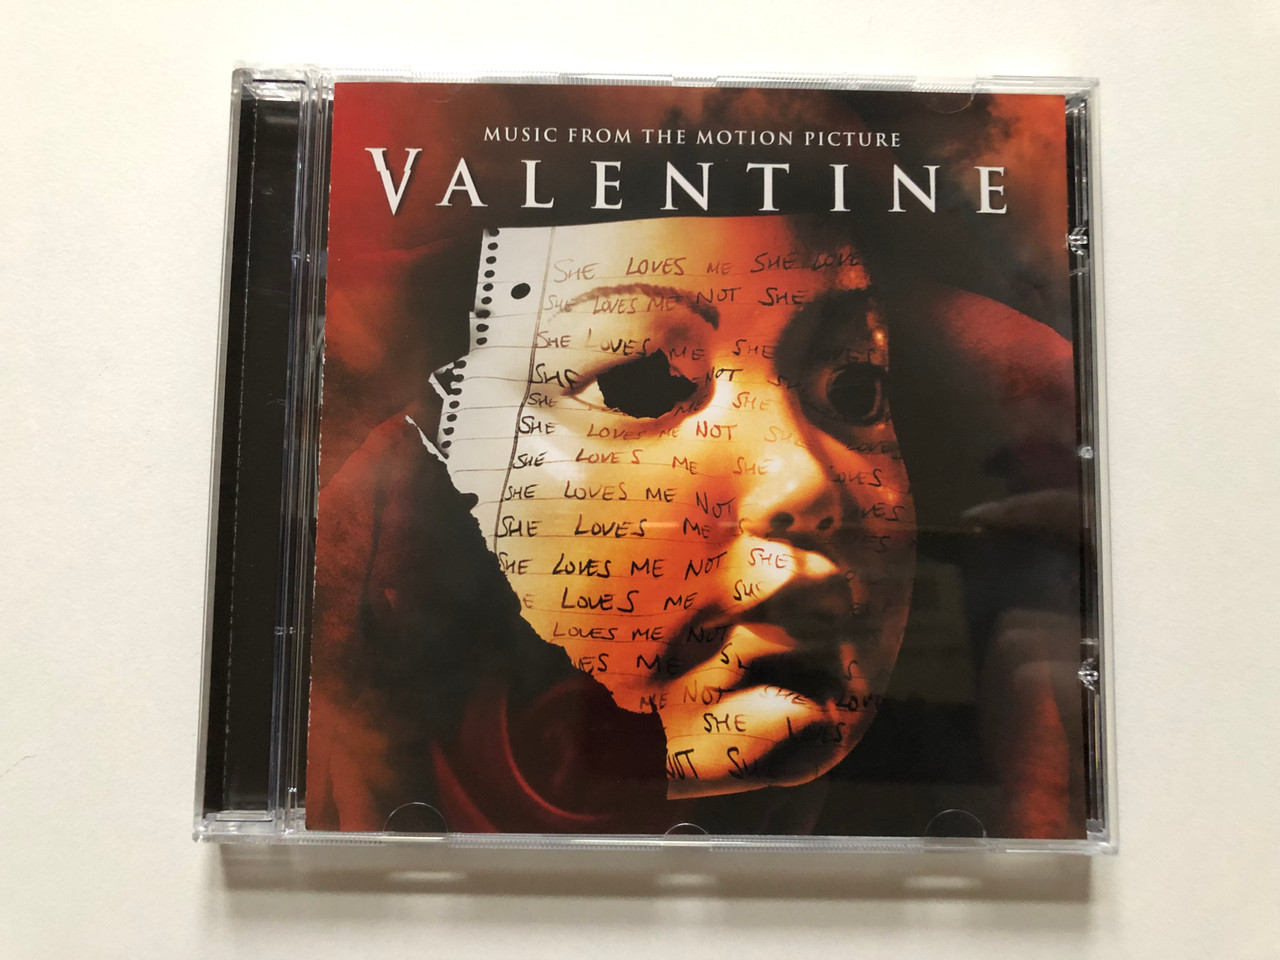 https://cdn10.bigcommerce.com/s-62bdpkt7pb/products/0/images/312910/Valentine_Music_From_The_Motion_Picture_Warner_Bros._Records_Audio_CD_2001_9362-47943-2_1__23544.1700213681.1280.1280.JPG?c=2